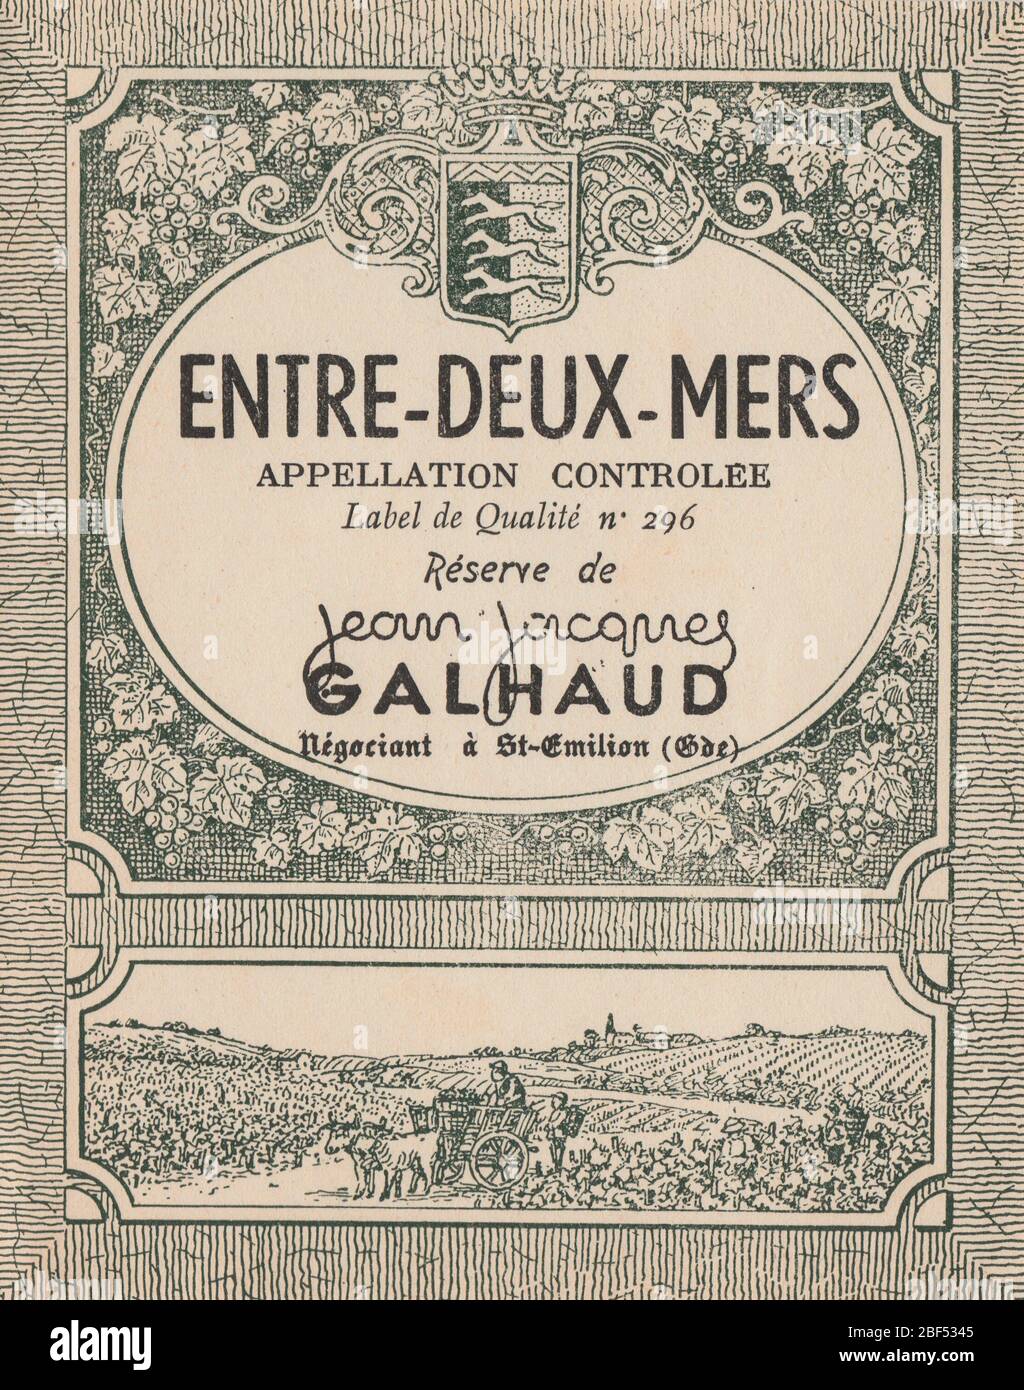 Unused vintage decoated wine label from a ‘entre-deux-mers’  Jean Jacques Galhaud, France Stock Photo